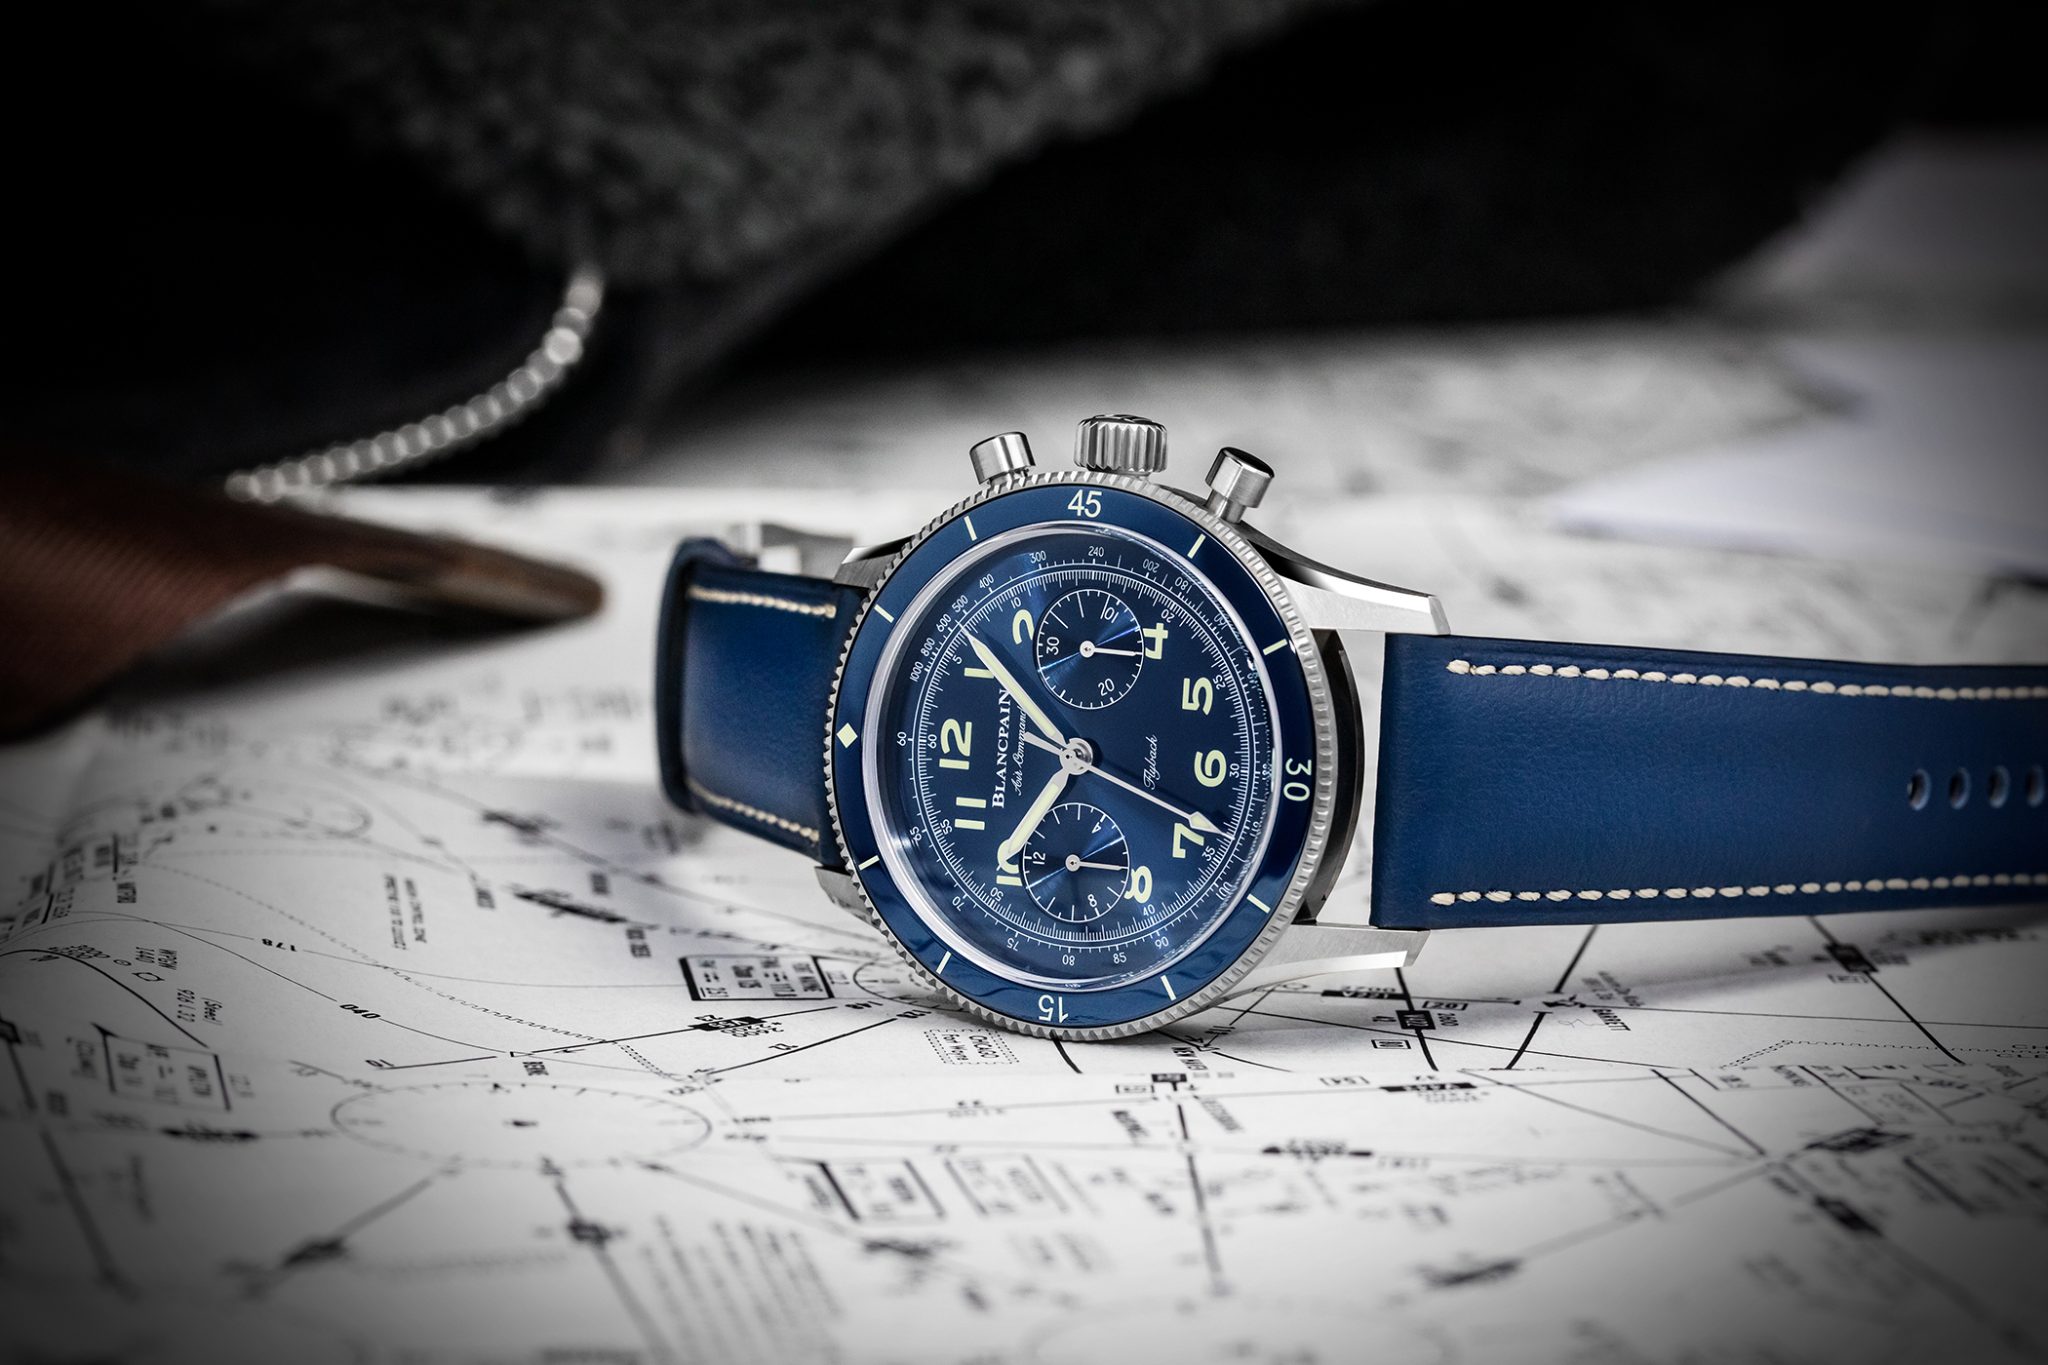 Blancpain-Air-Command-Flyback-Chronograph-Titanium-Overview-Lifestyle